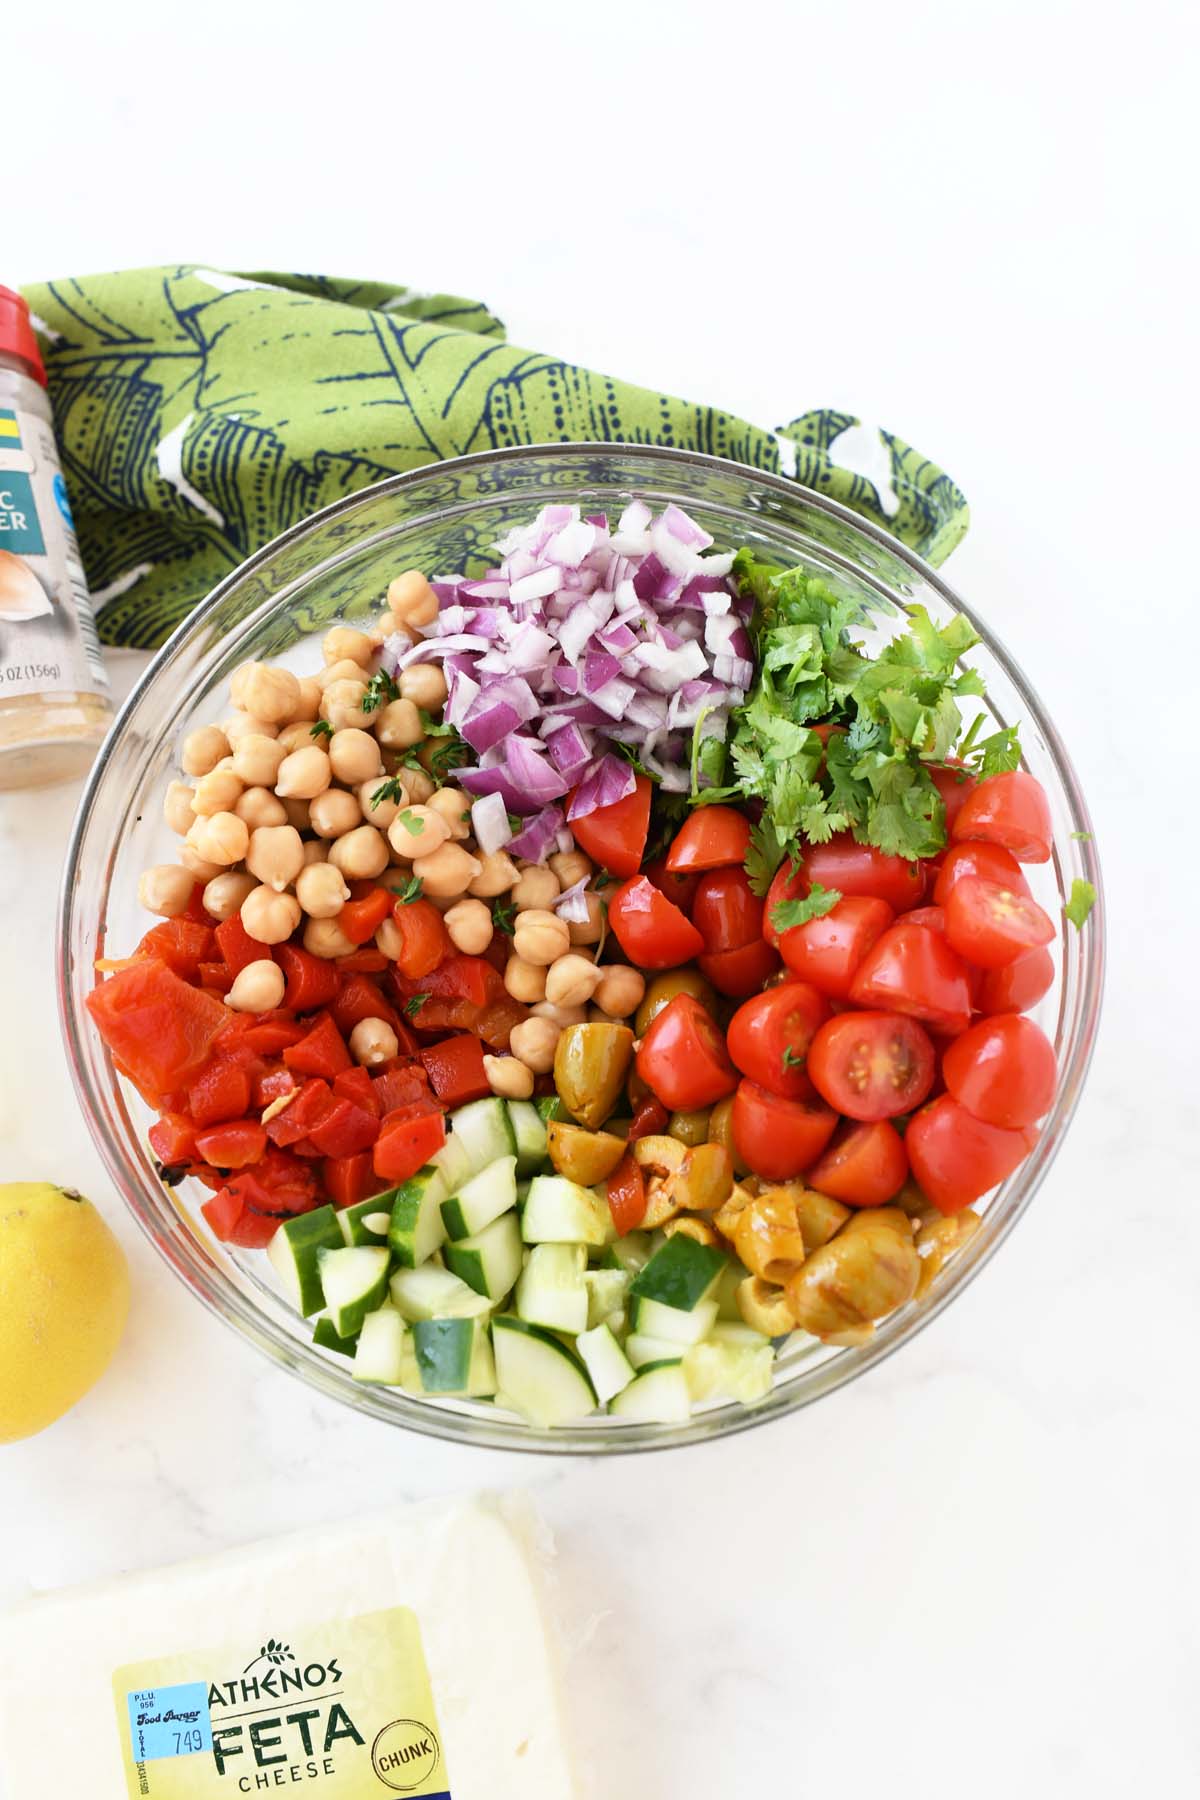 Colorful chopped veggies and chickpeas in a glass bowl.